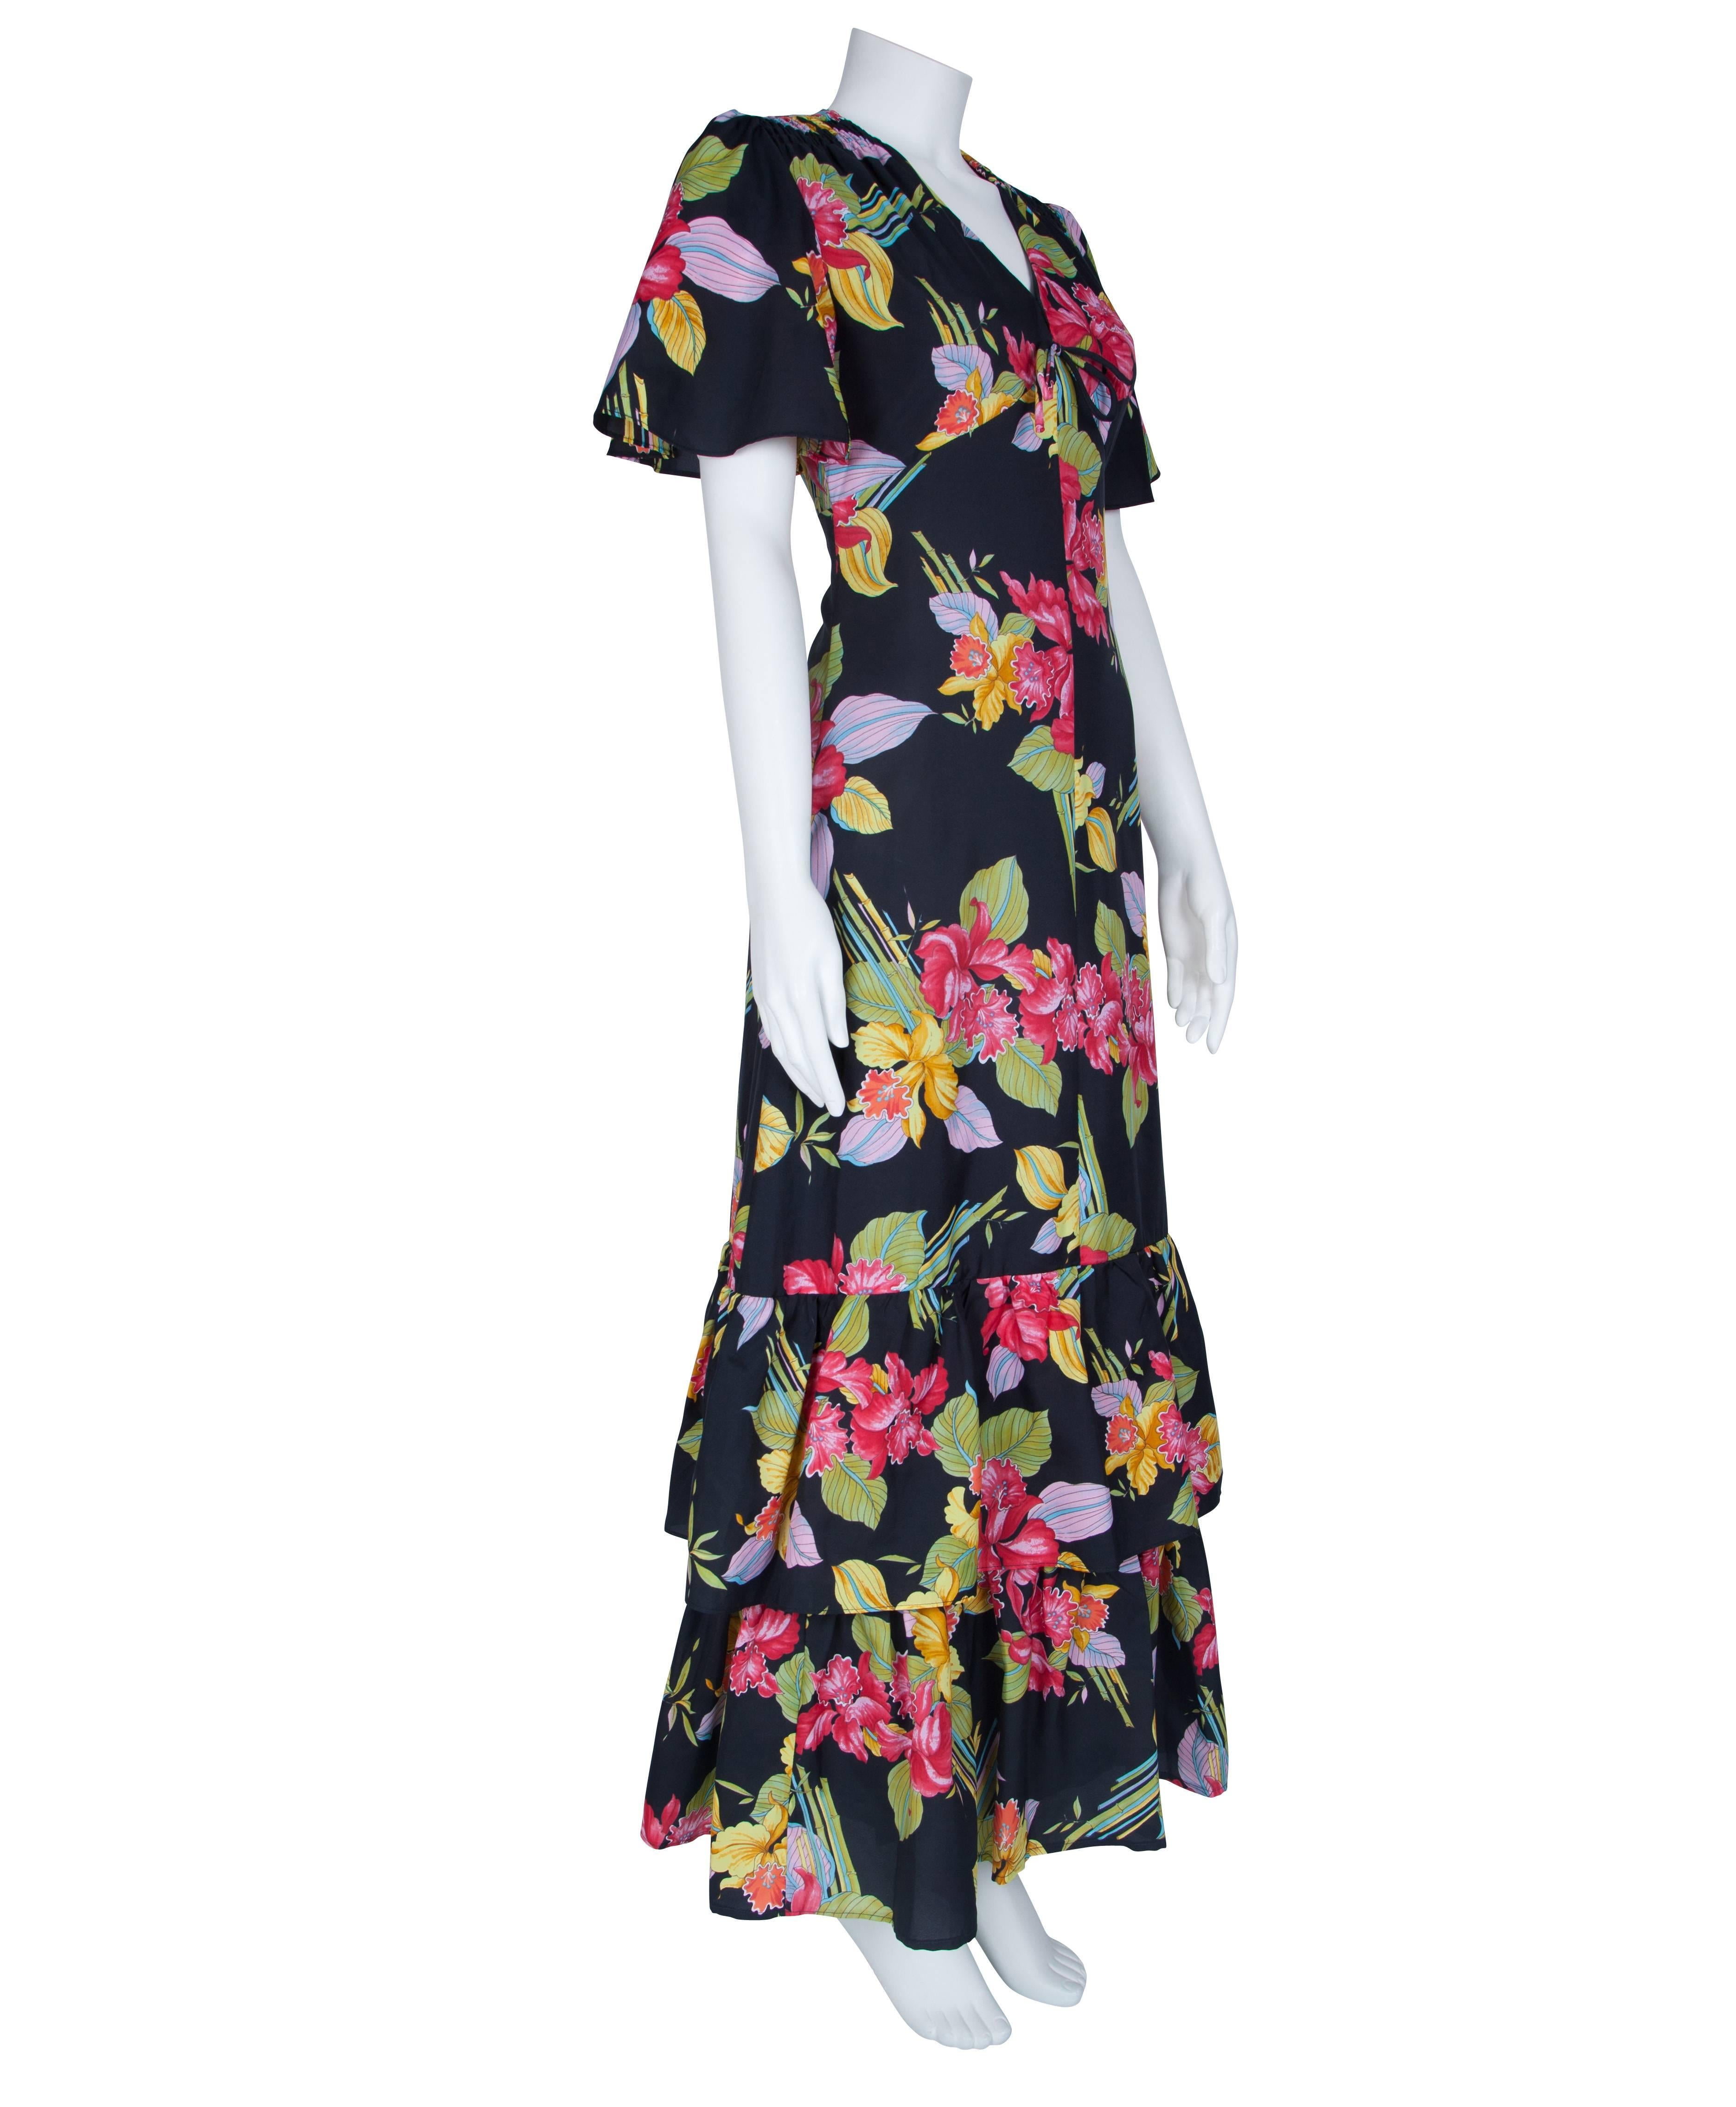 1970's Black Floral Ruffled 2-in-1 Dress with Capelet Sleeves In Excellent Condition For Sale In London, GB